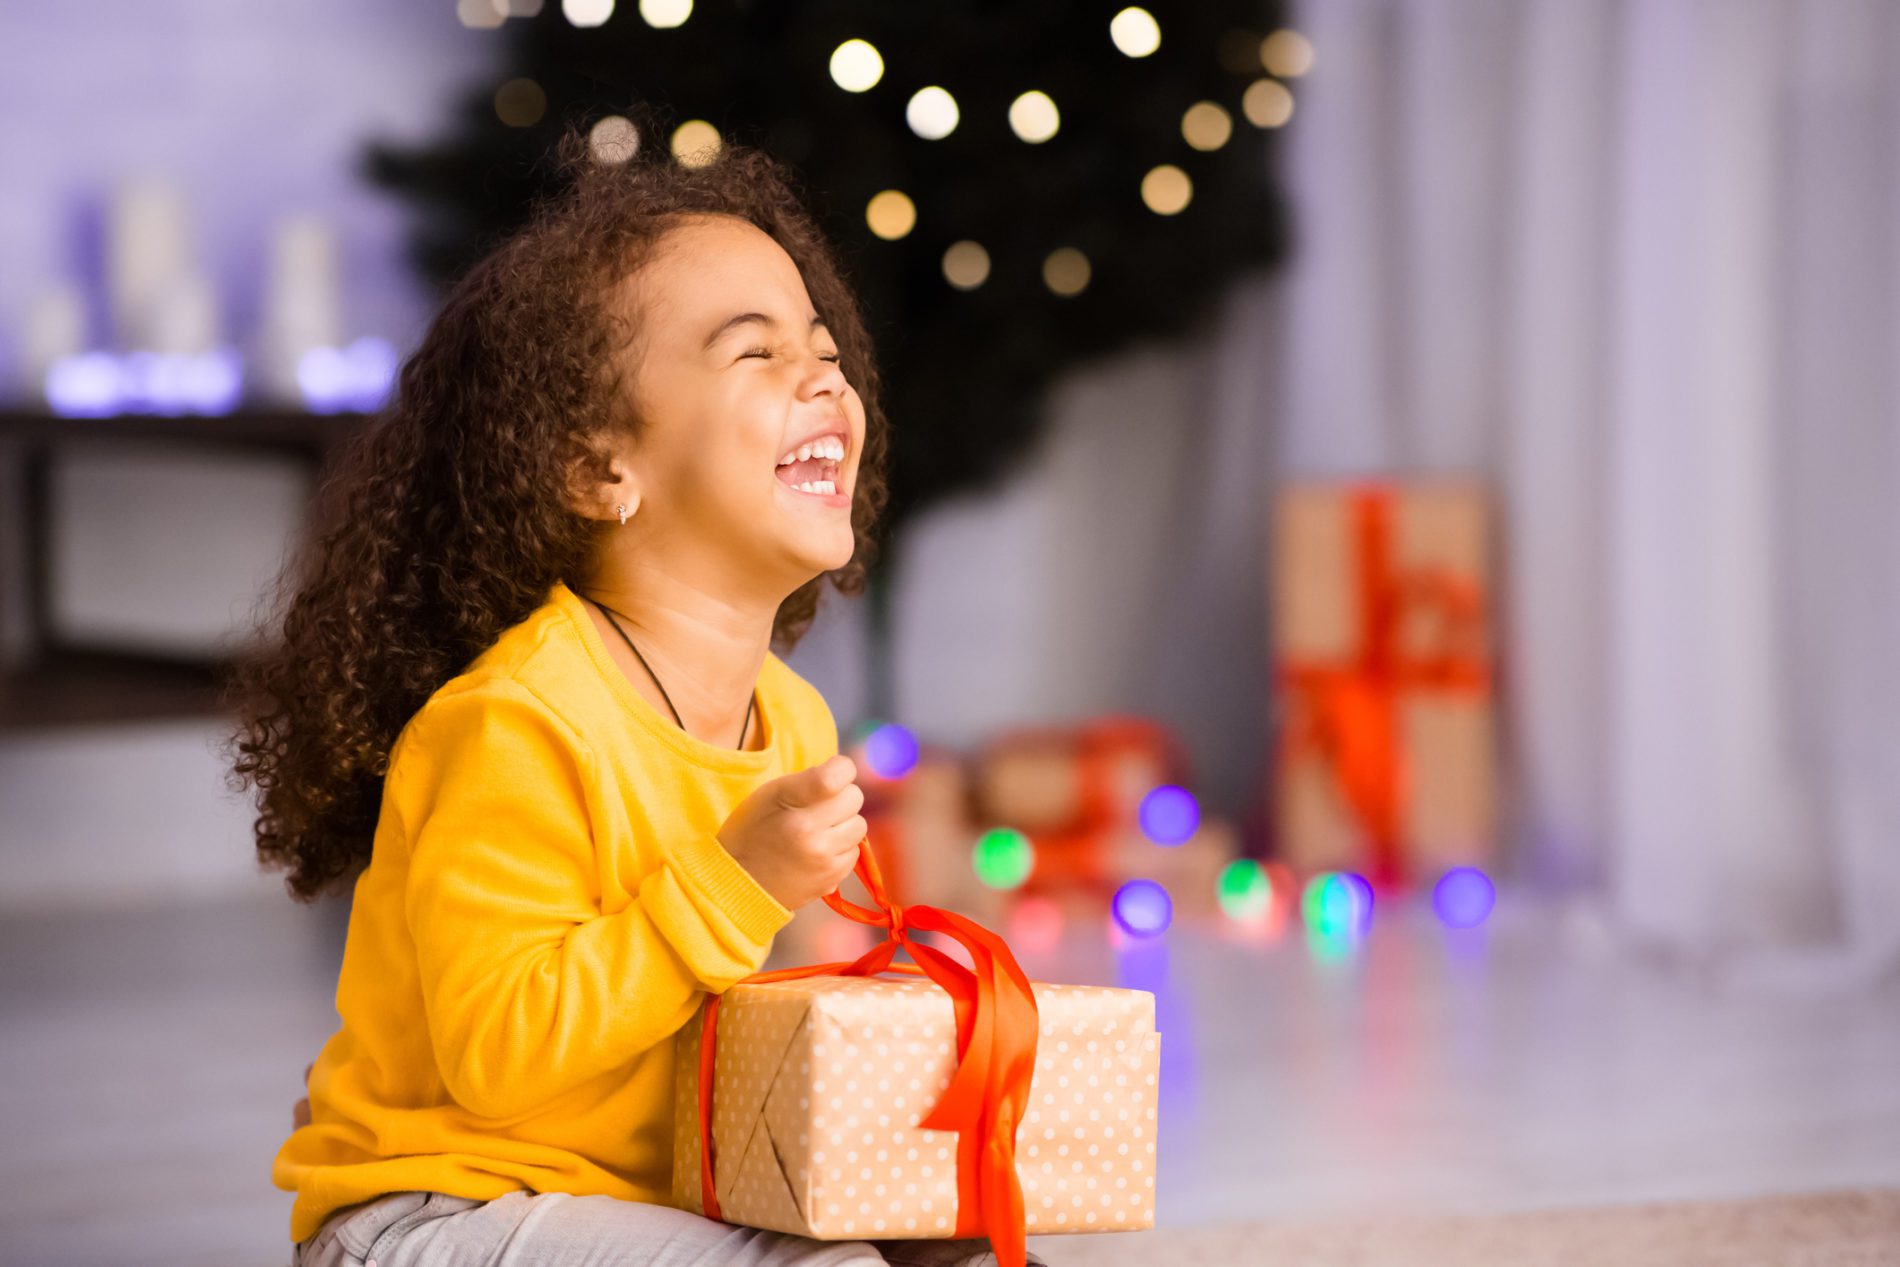 Join the 2020 CFI Toy Drive